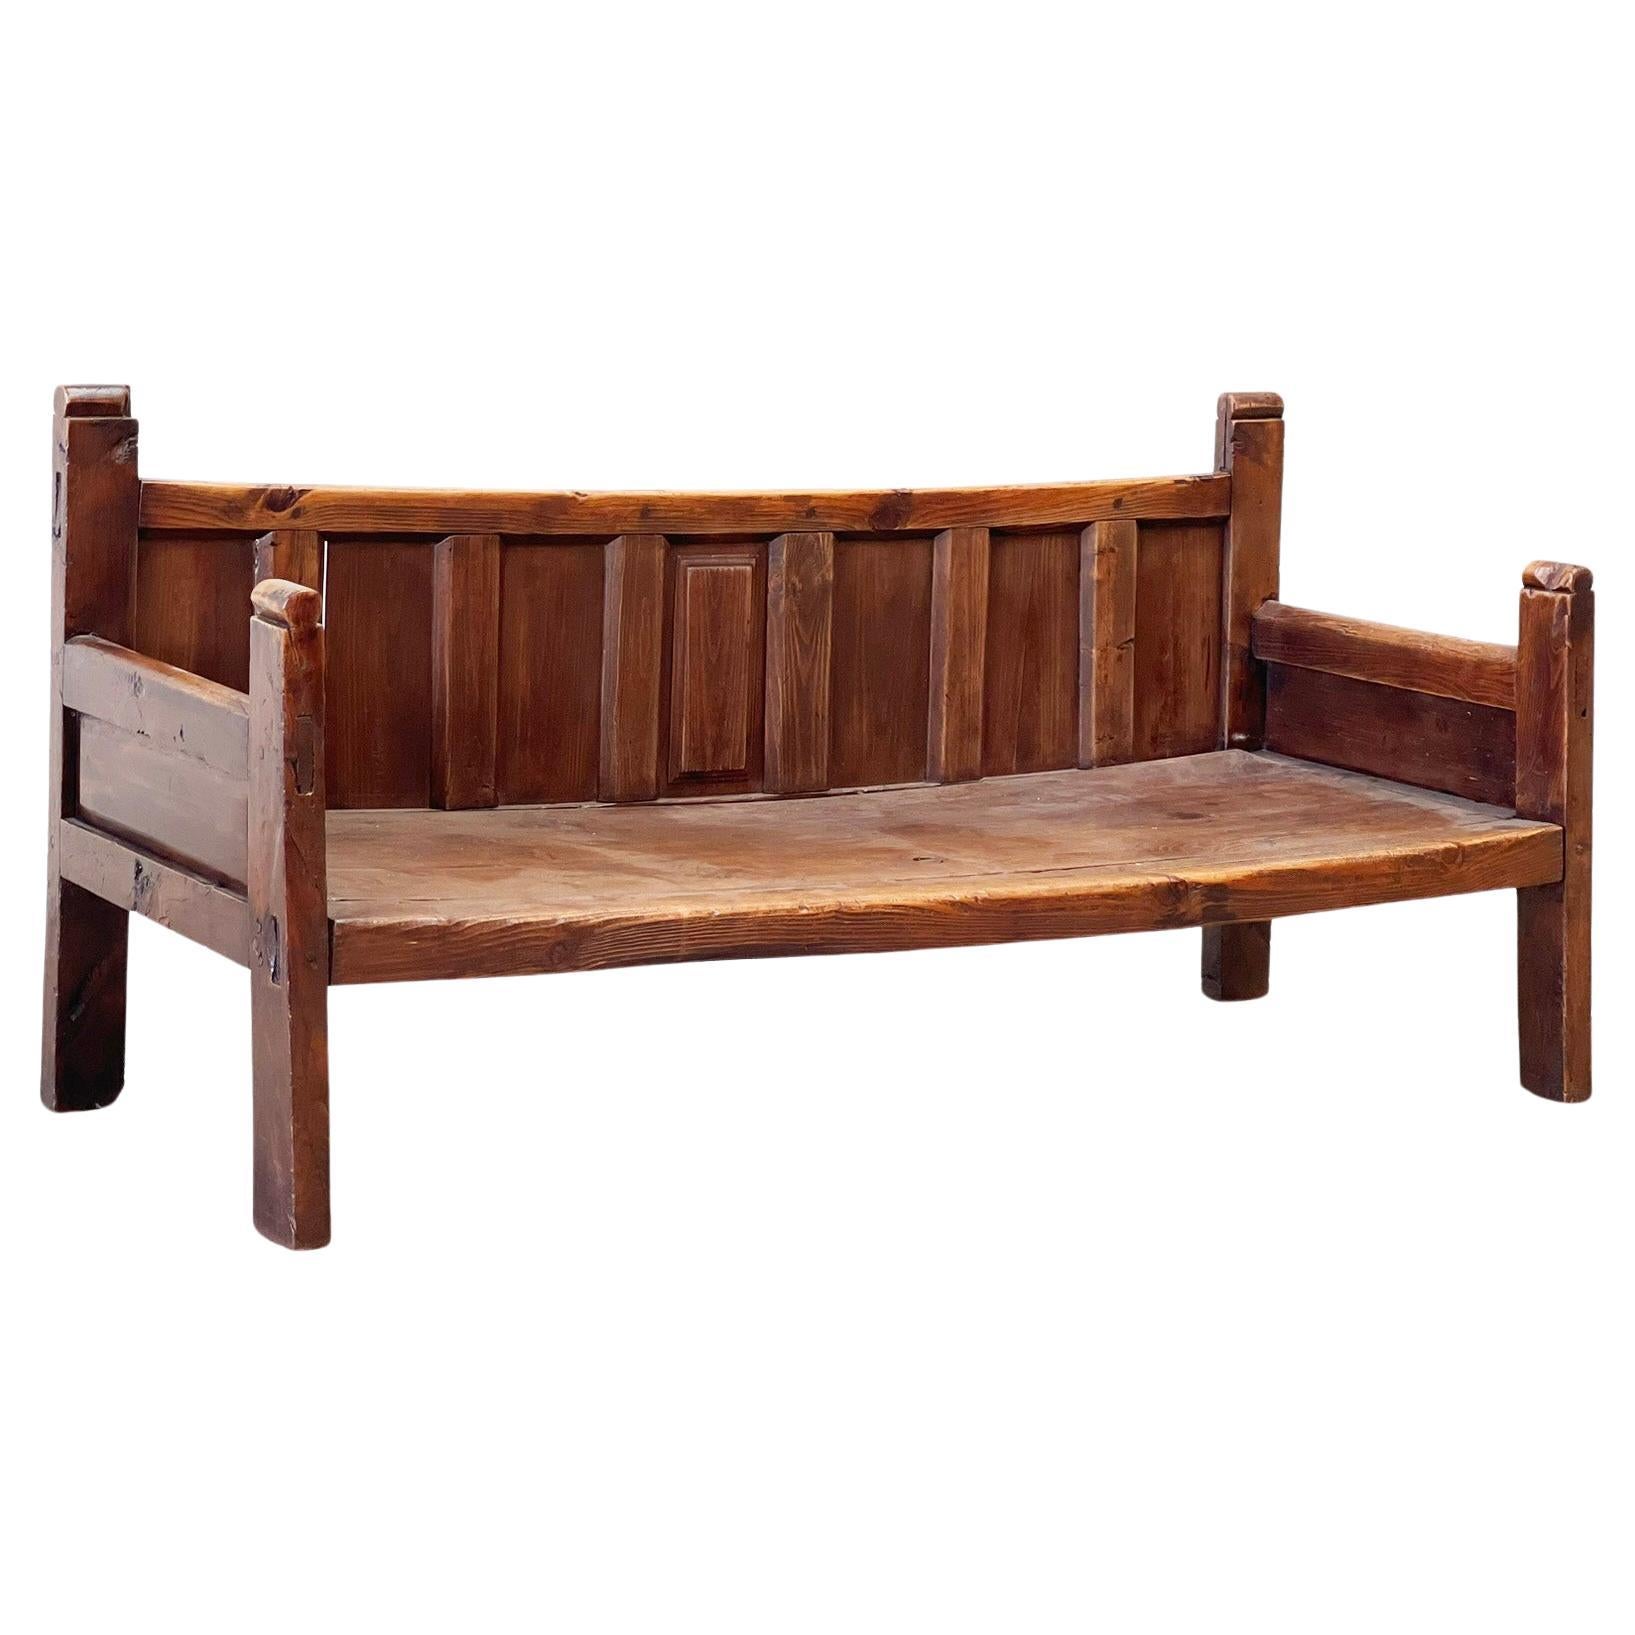 Early 20th century Spanish bench For Sale